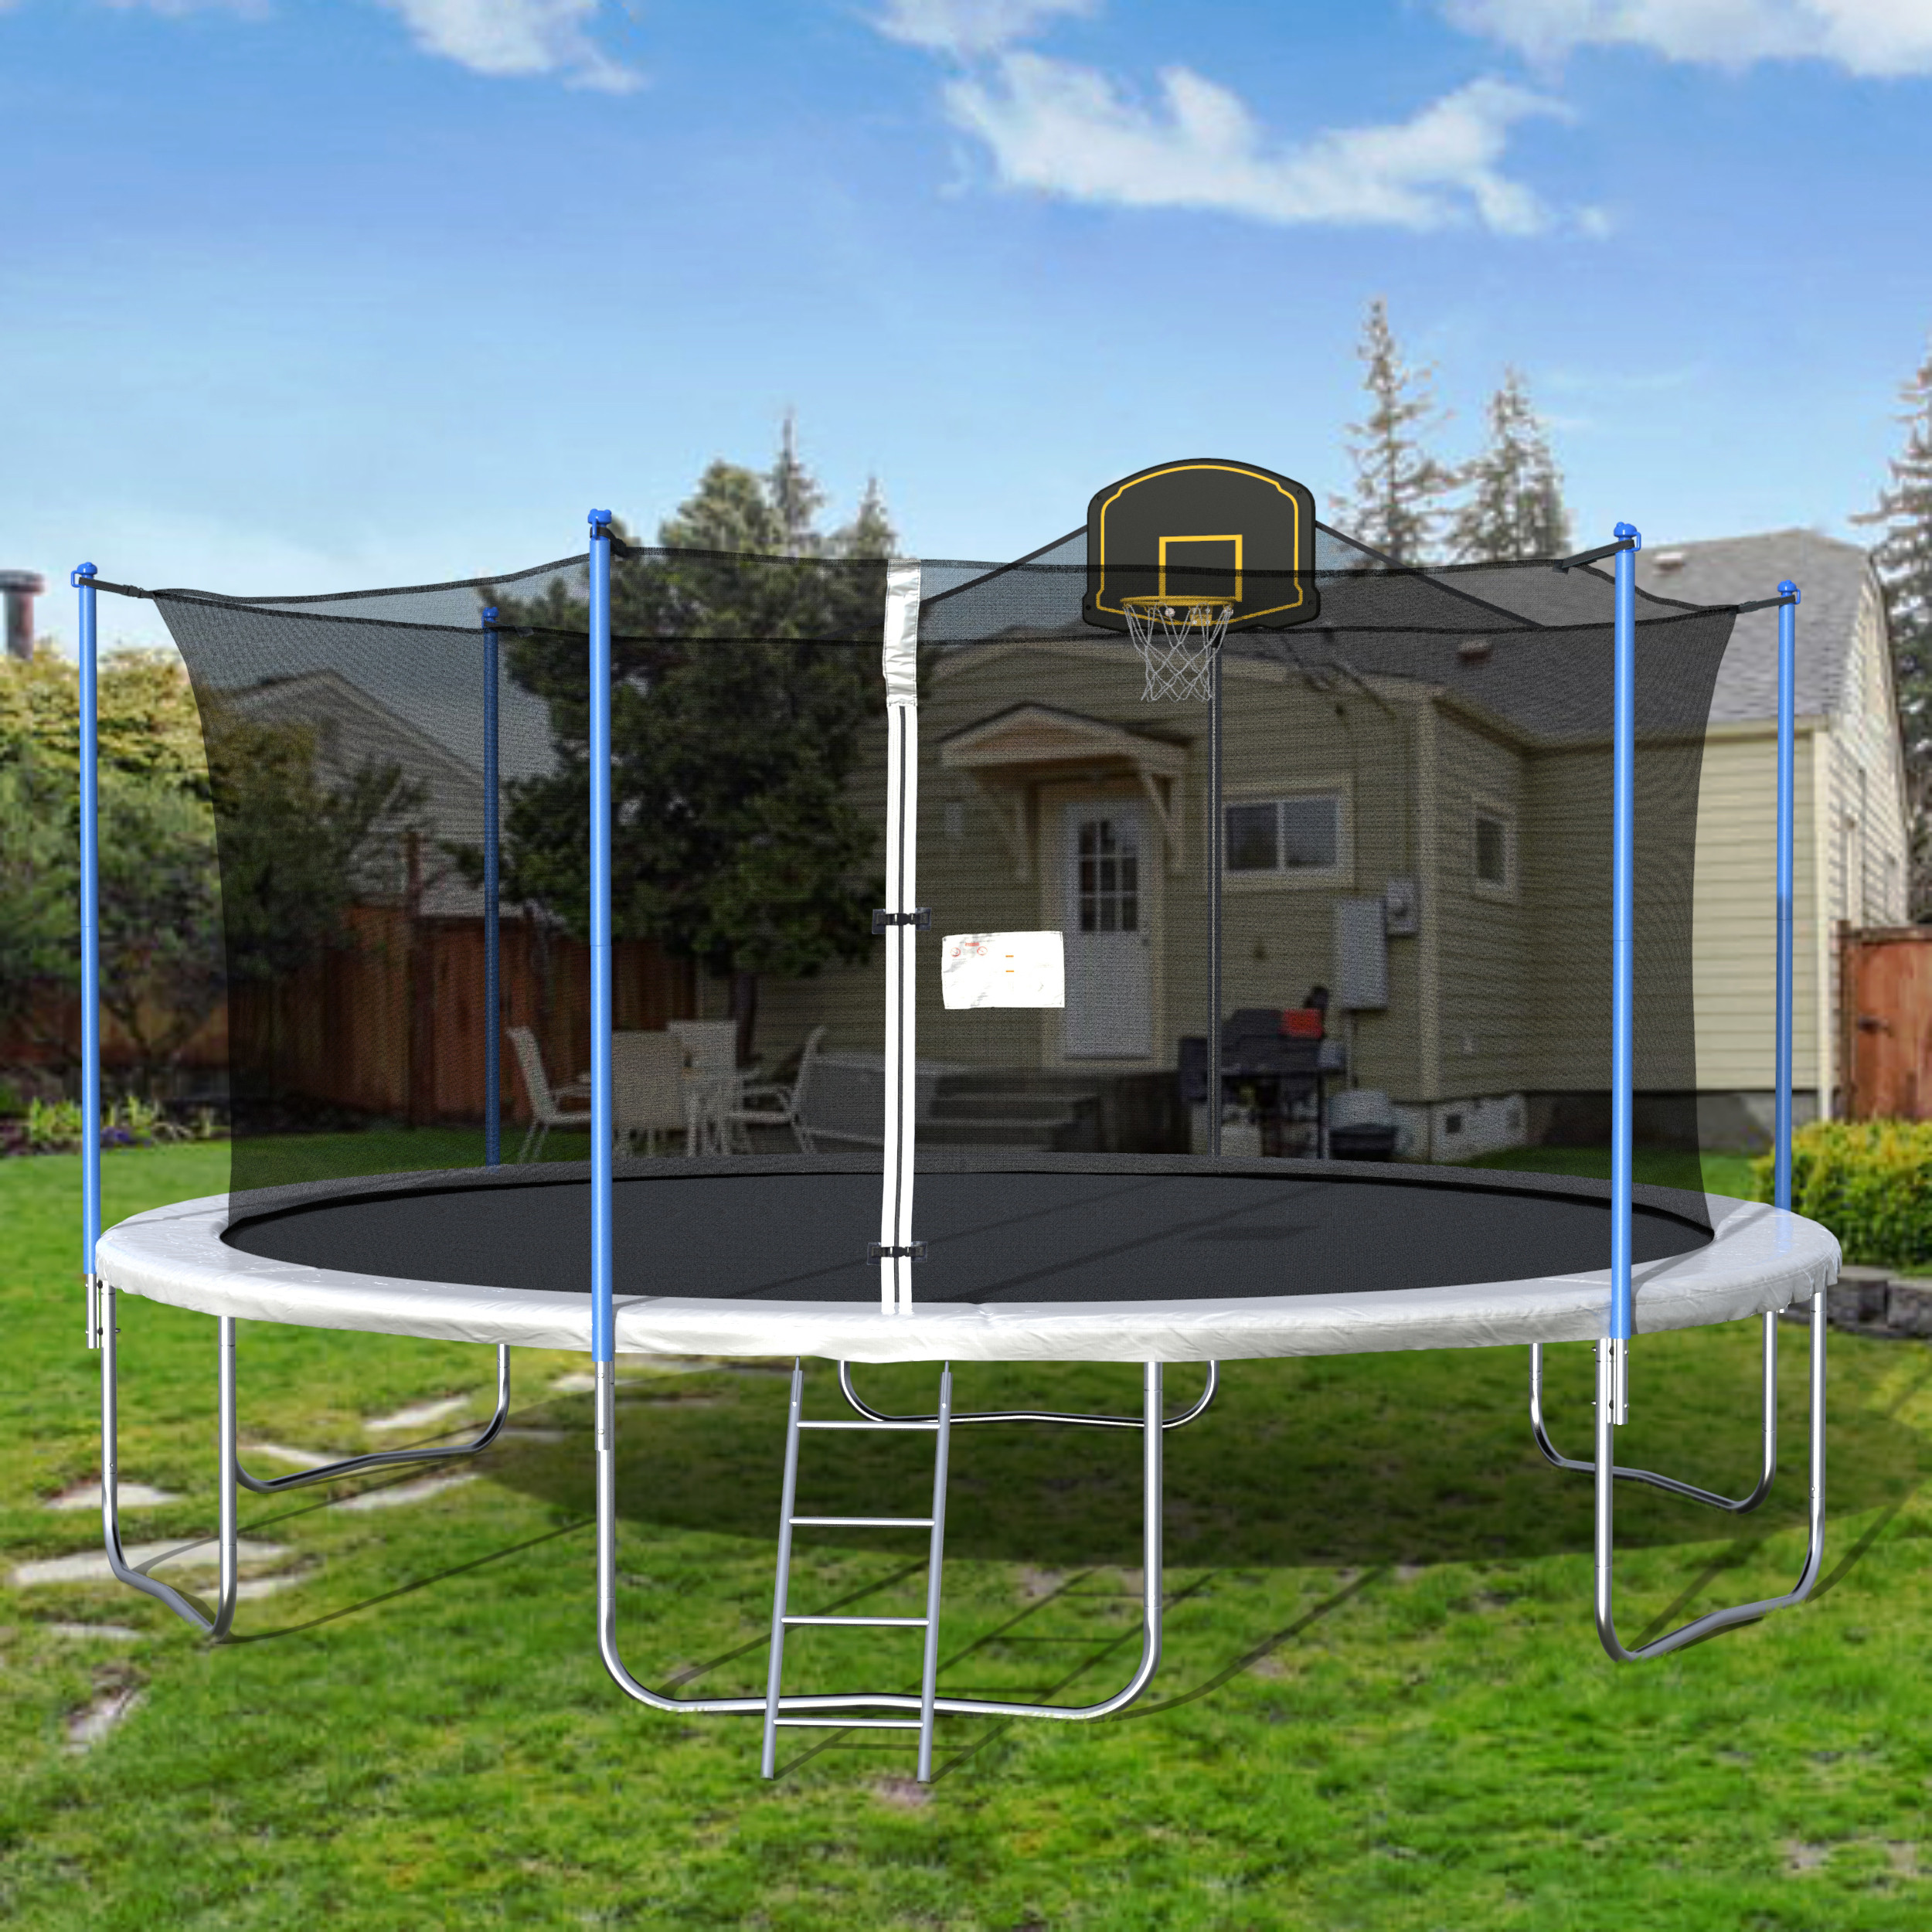 Outdoor Trampoline For Kids
 2020 New 16 Foot Trampoline Kids Trampoline with Safety